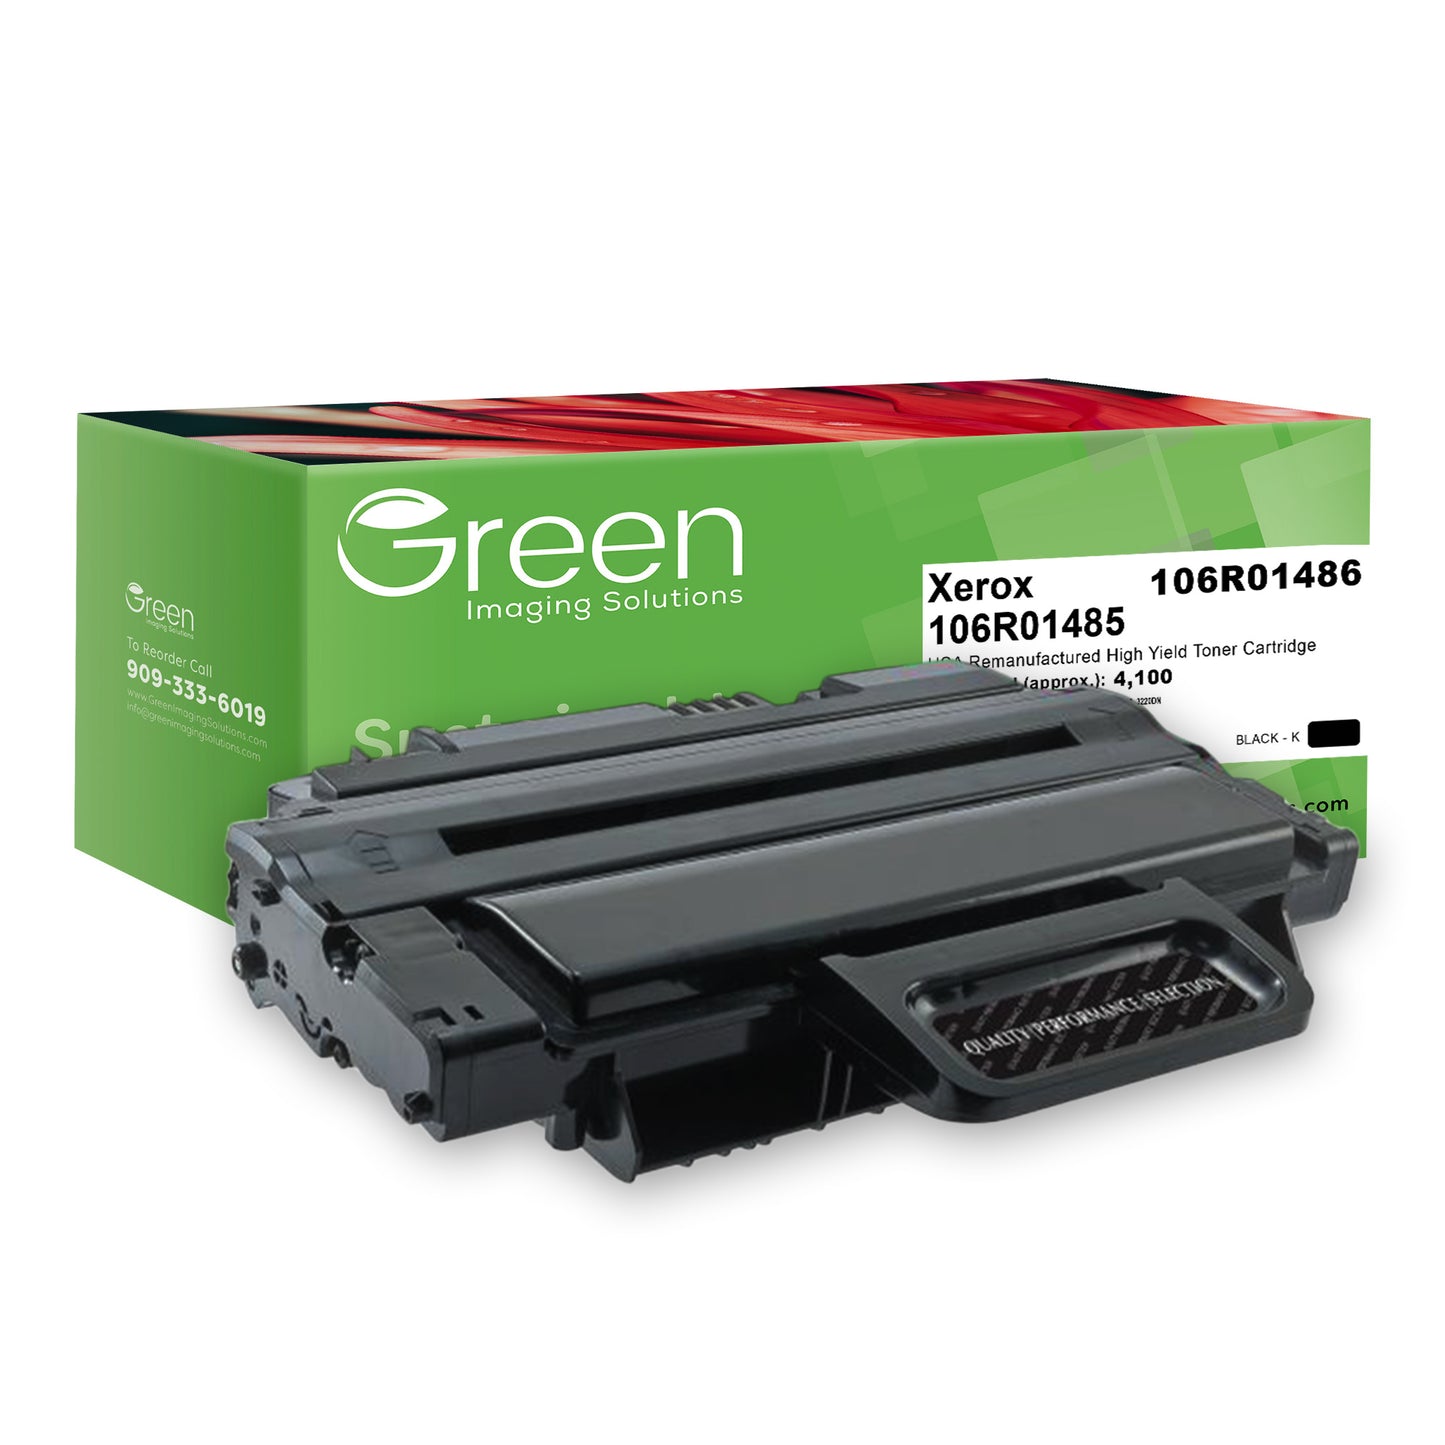 Green Imaging Solutions USA Remanufactured High Yield Toner Cartridge for Xerox 106R01485/106R01486